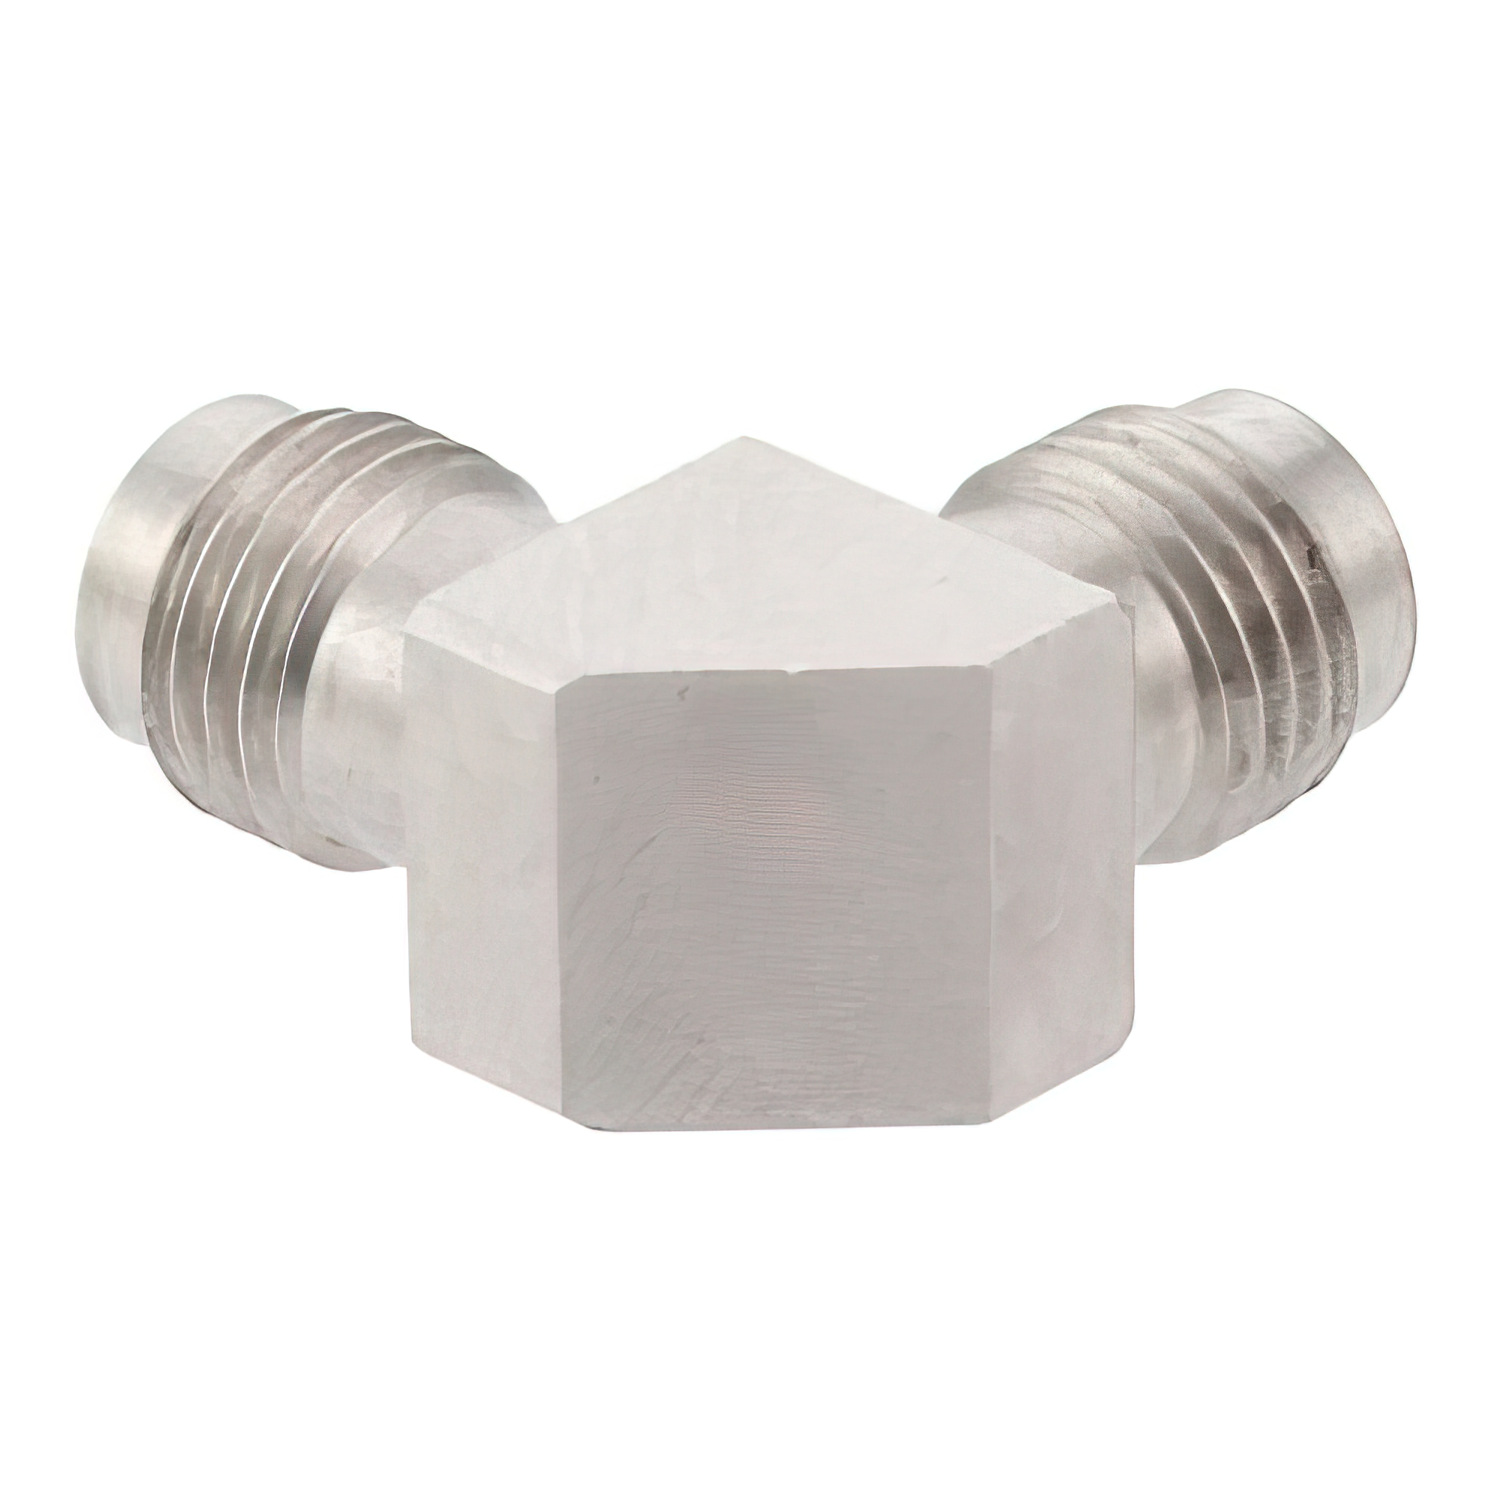 2.4mm Female to 2.4mm Female Miter Right Angle Adapter3